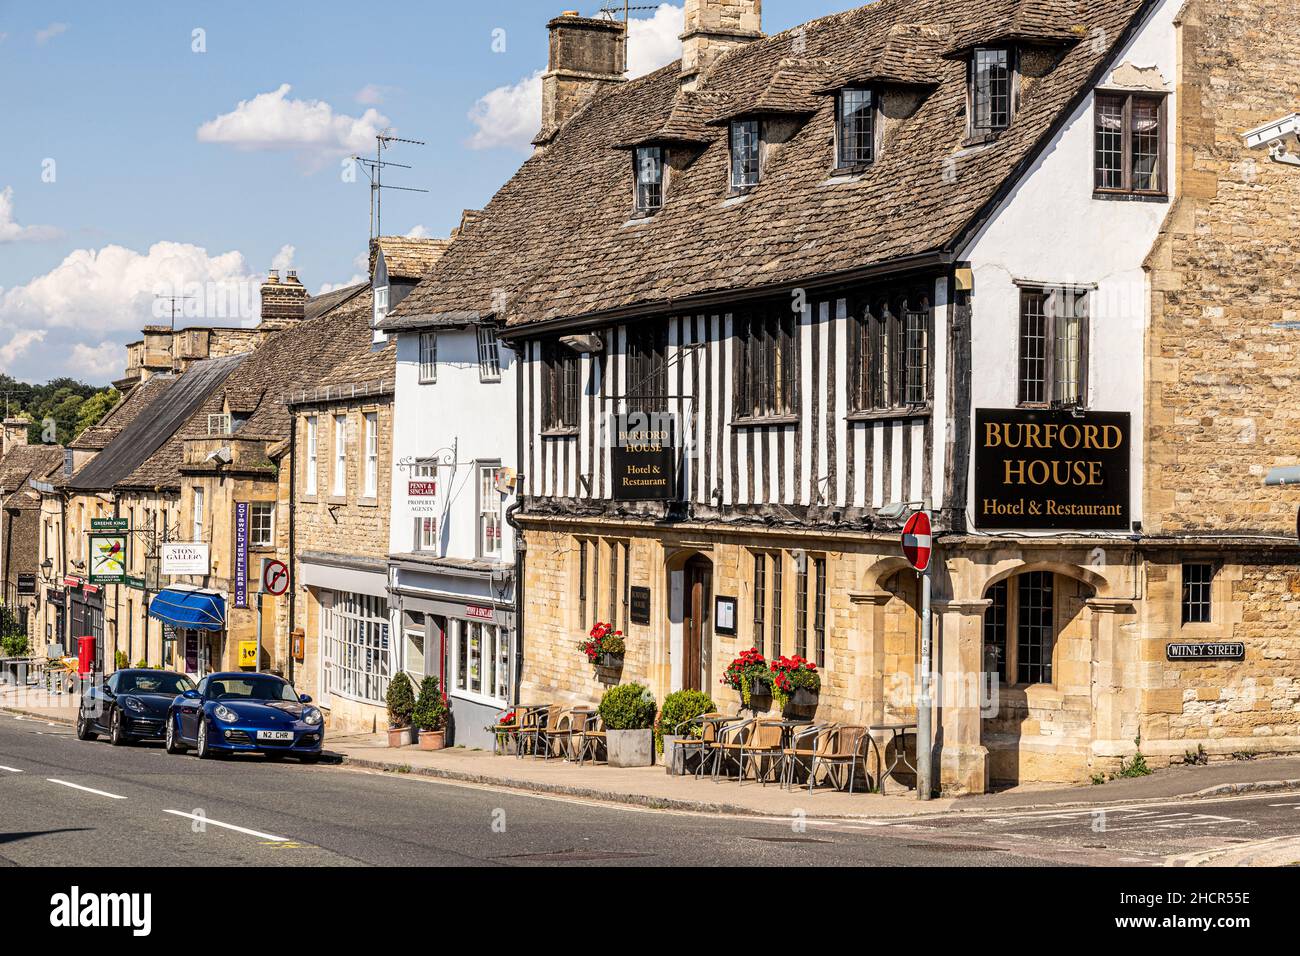 The Burford House Hotel and Restaurant in the High Street of the Cotswold town of Burford, Oxfordshire UK Stock Photo